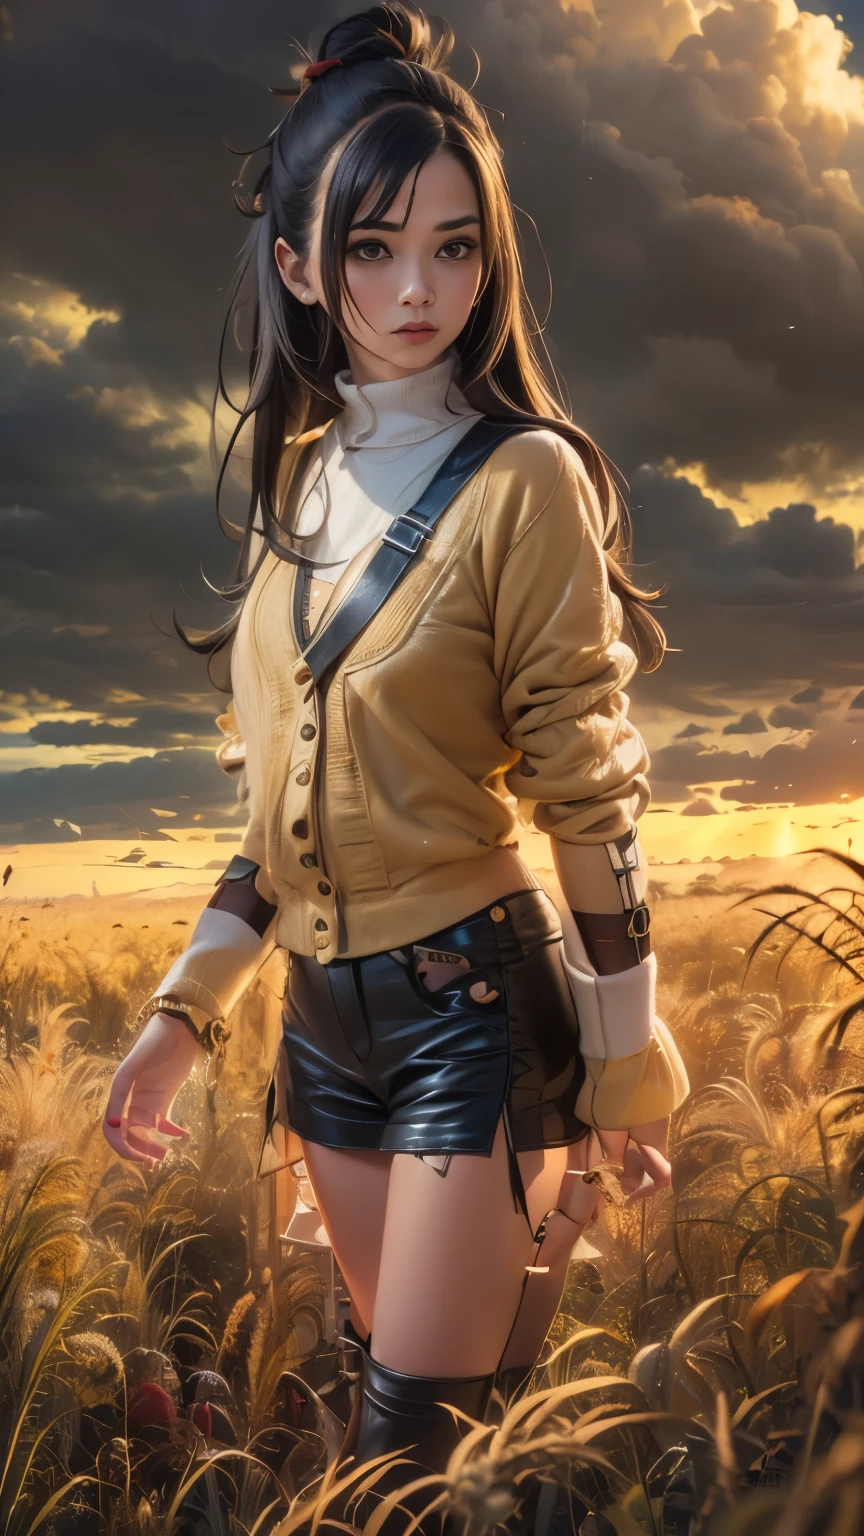 (realism: 1.3), Great, quality, Rembrandt lighting, (Masterpiece: 1.2), (realism: 1.2), (Best quality), (leather details: 1.3), (complex part), dramatic, Idyllic, ray tracing, 1 girl, Chinese yellow girl, long black hair, young - beautiful 16 years old, modern clothes (meadow, Sun, clouds, fields, farms, star Light,